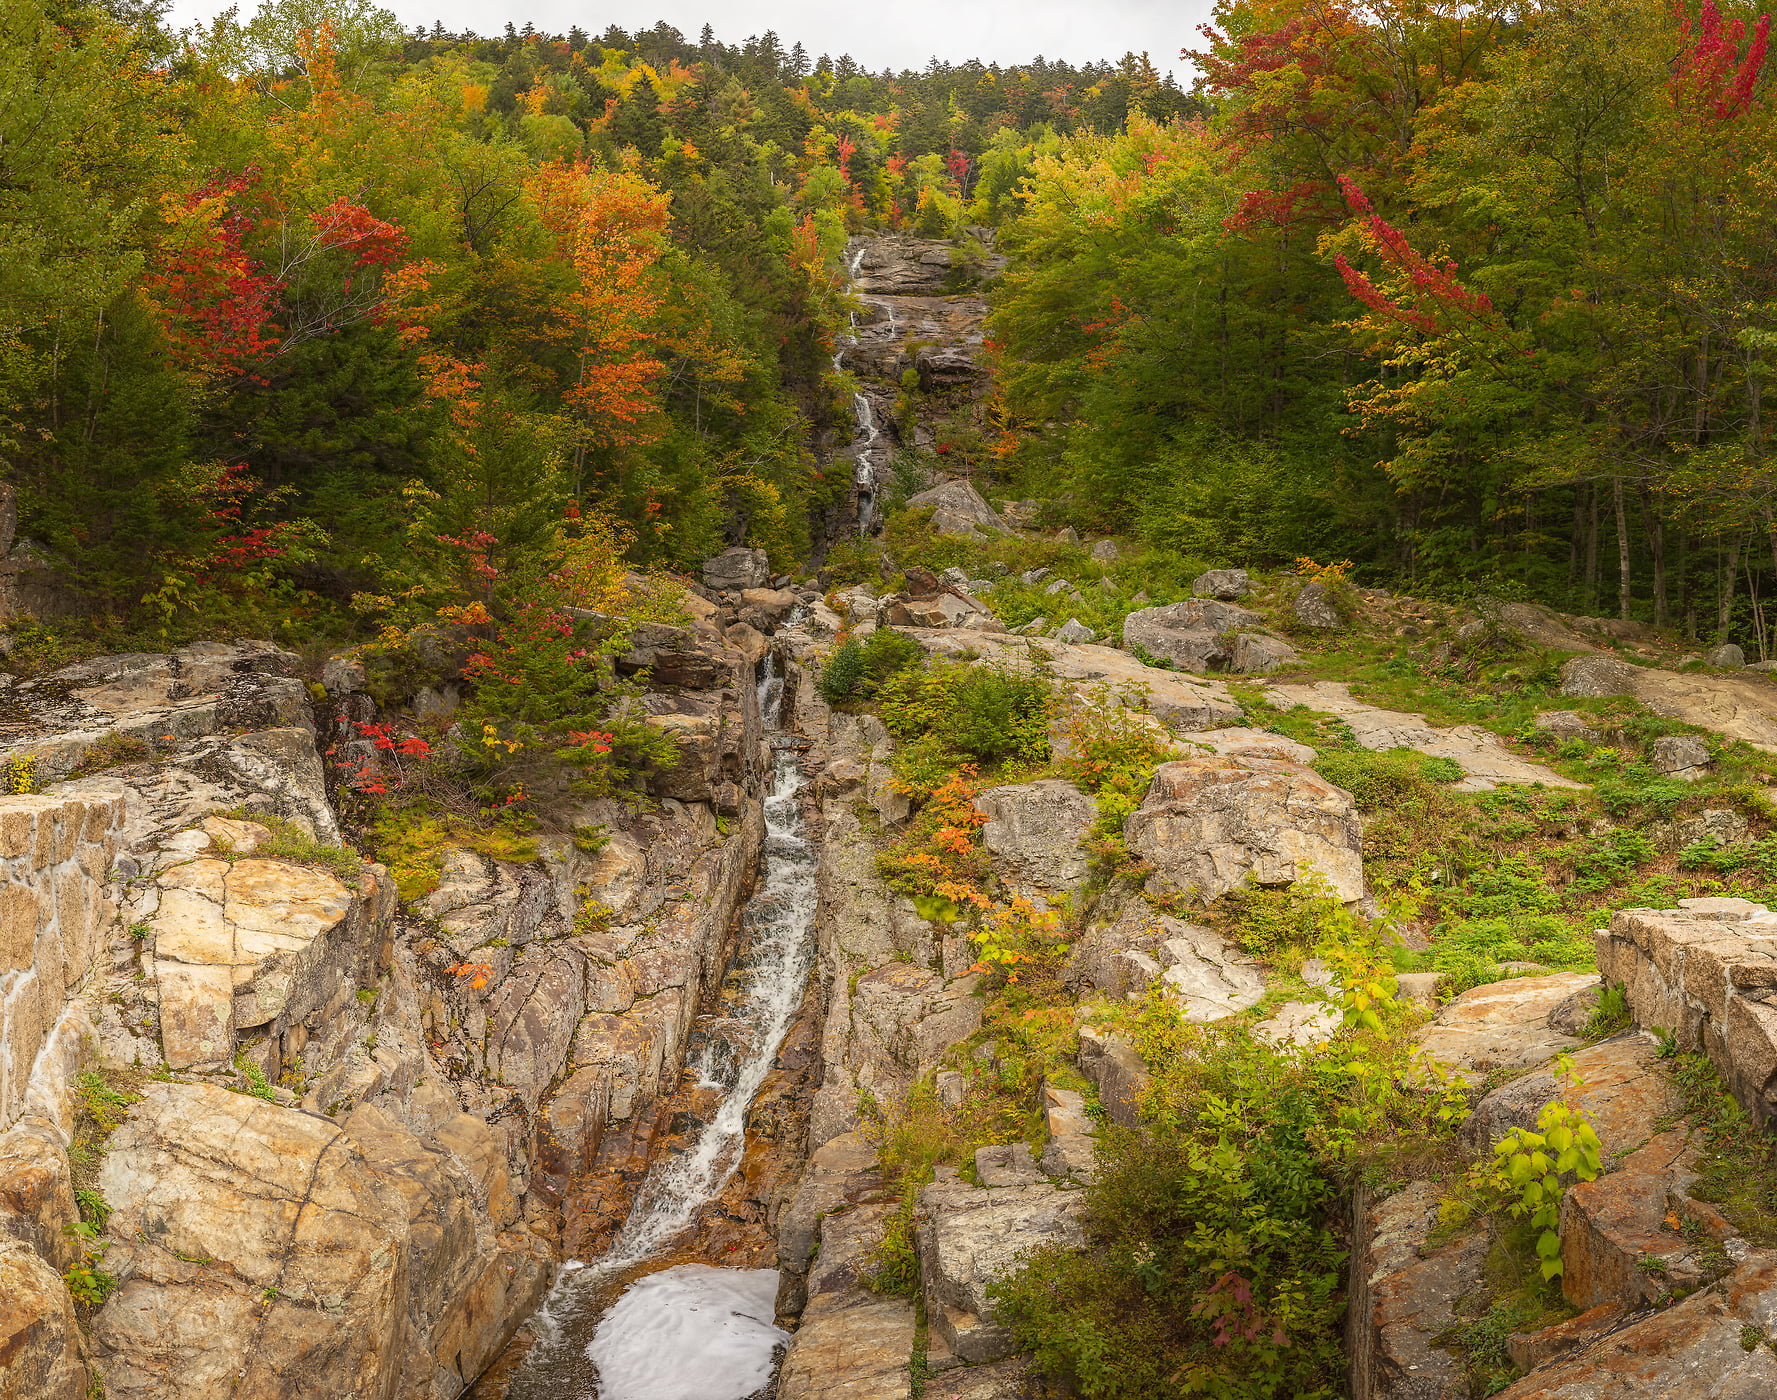 2,846 megapixels! A very high resolution, large-format VAST photo print of a waterfall in autumn; nature photograph created by John Freeman in White Mountains, New Hampshire.